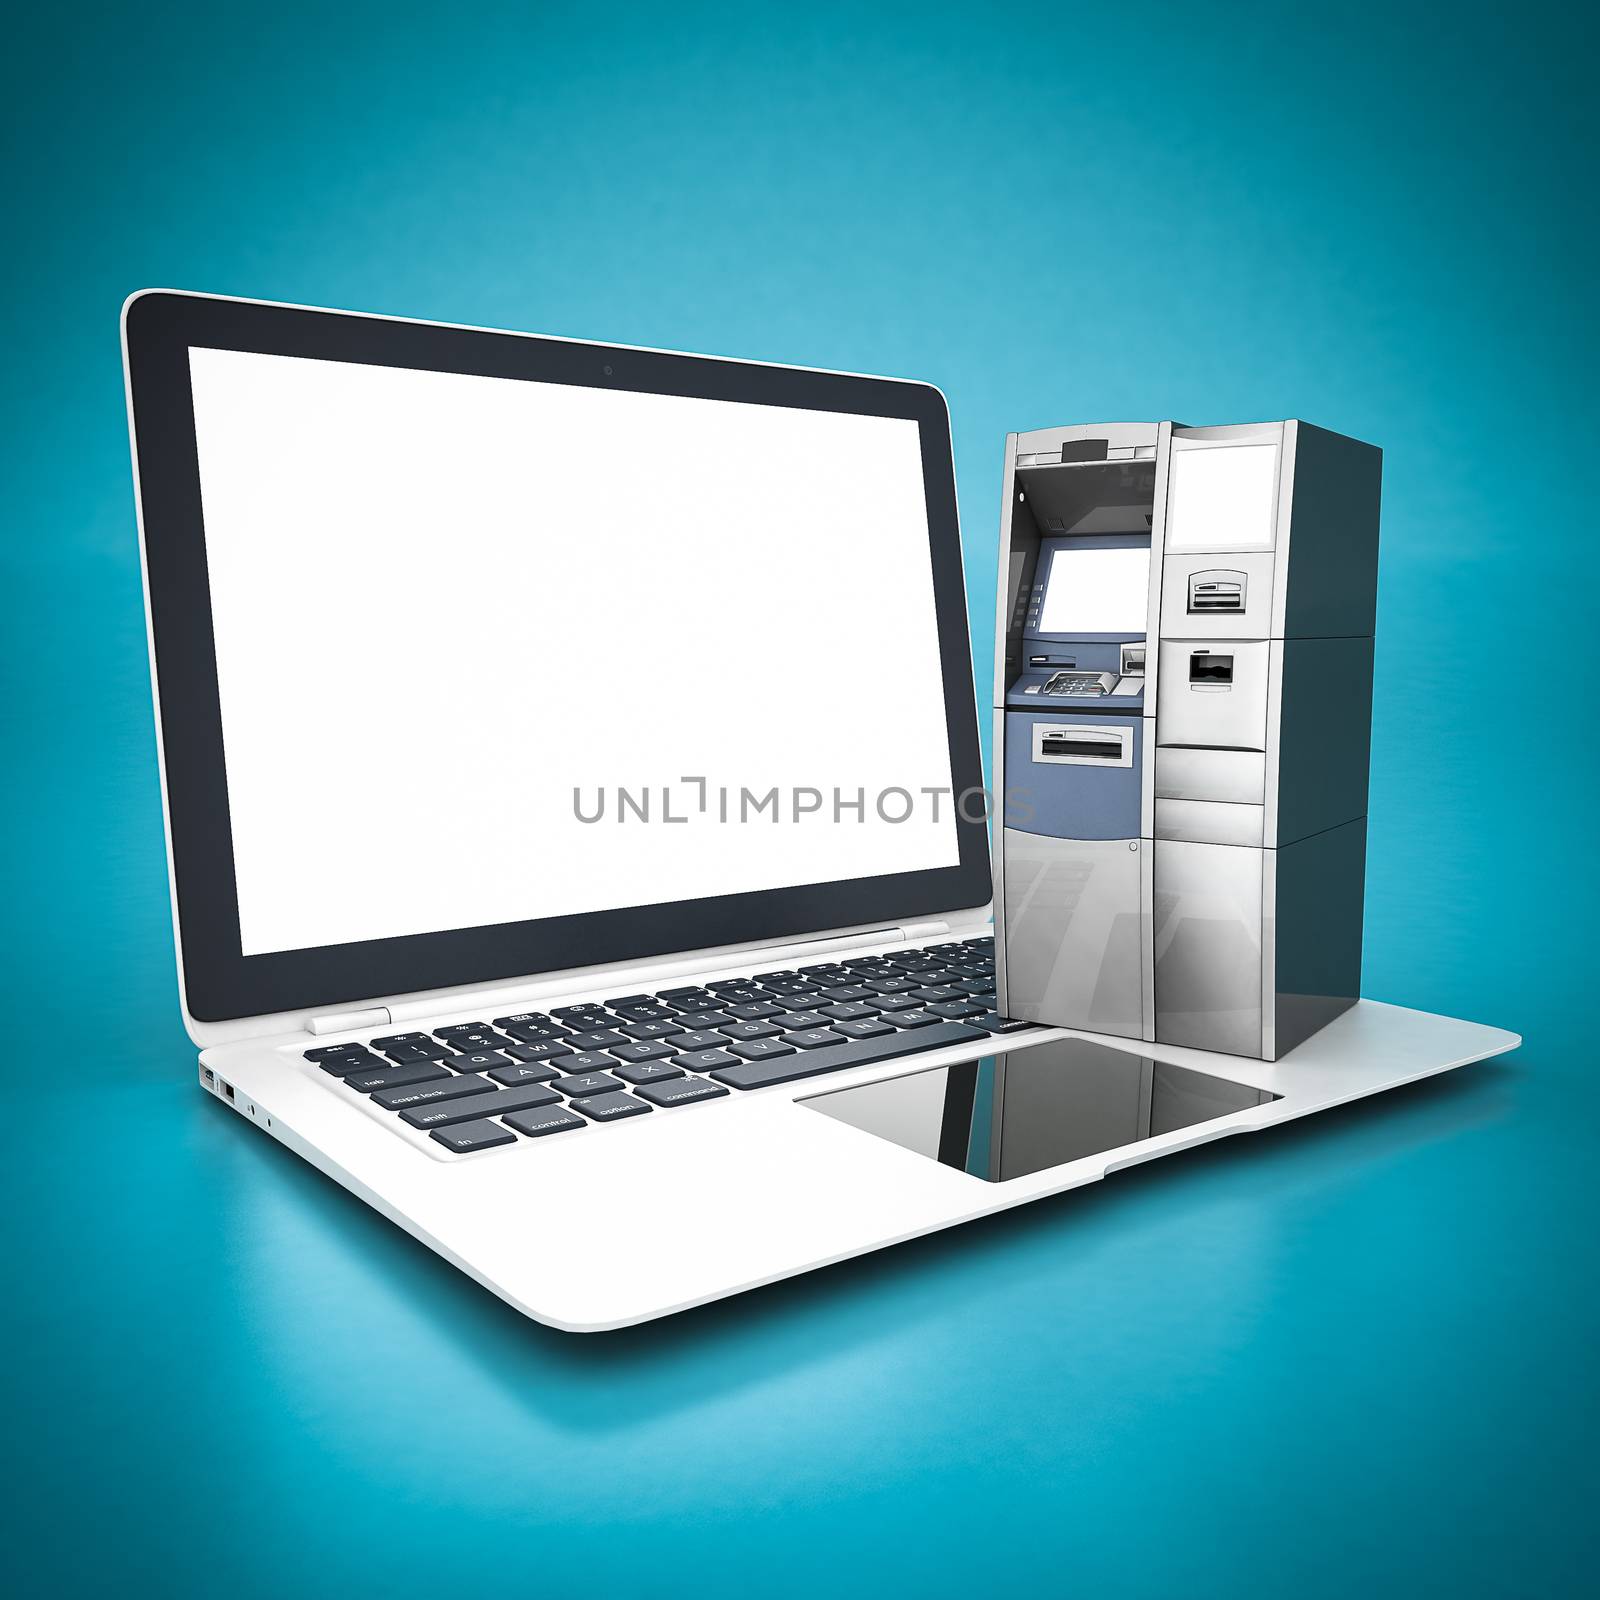 image of the new ATM on blue background